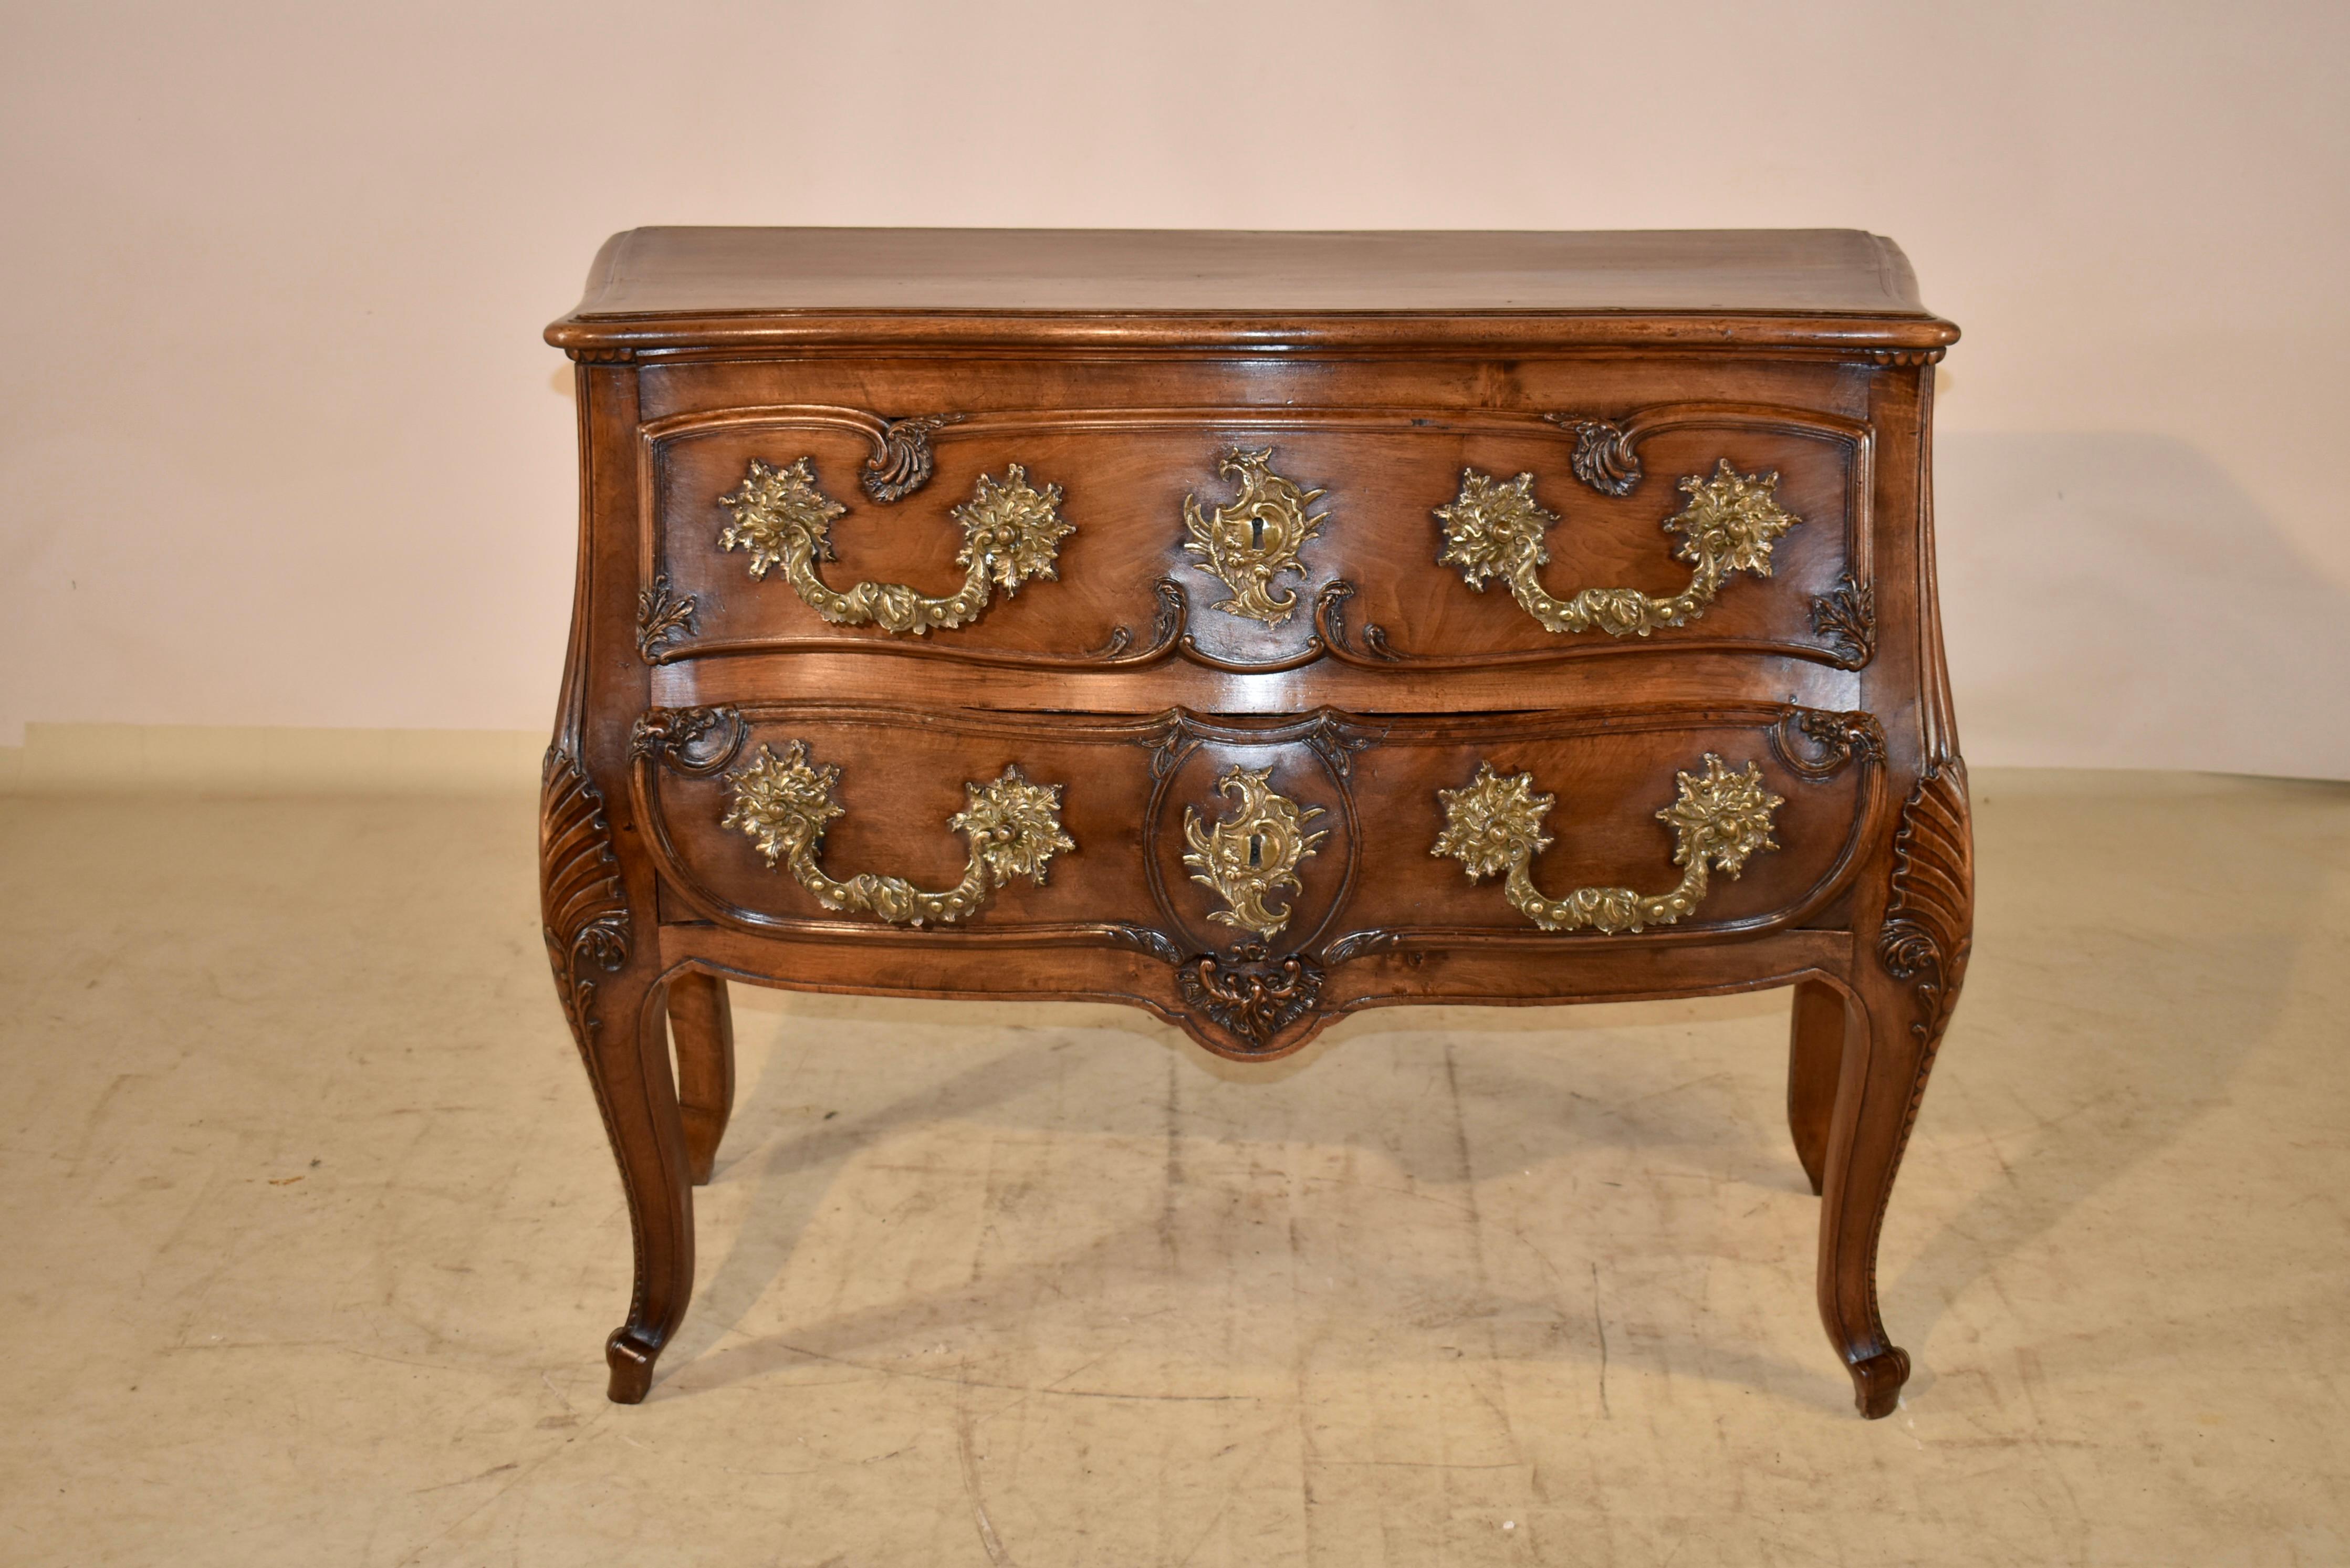 Superb quality 18th century period Louis XV two drawer commode. The top has scalloped and shaped edges, which are beveled and molded and follows down to hand paneled sides, which are also shaped. The commode has two drawers in the front, both with